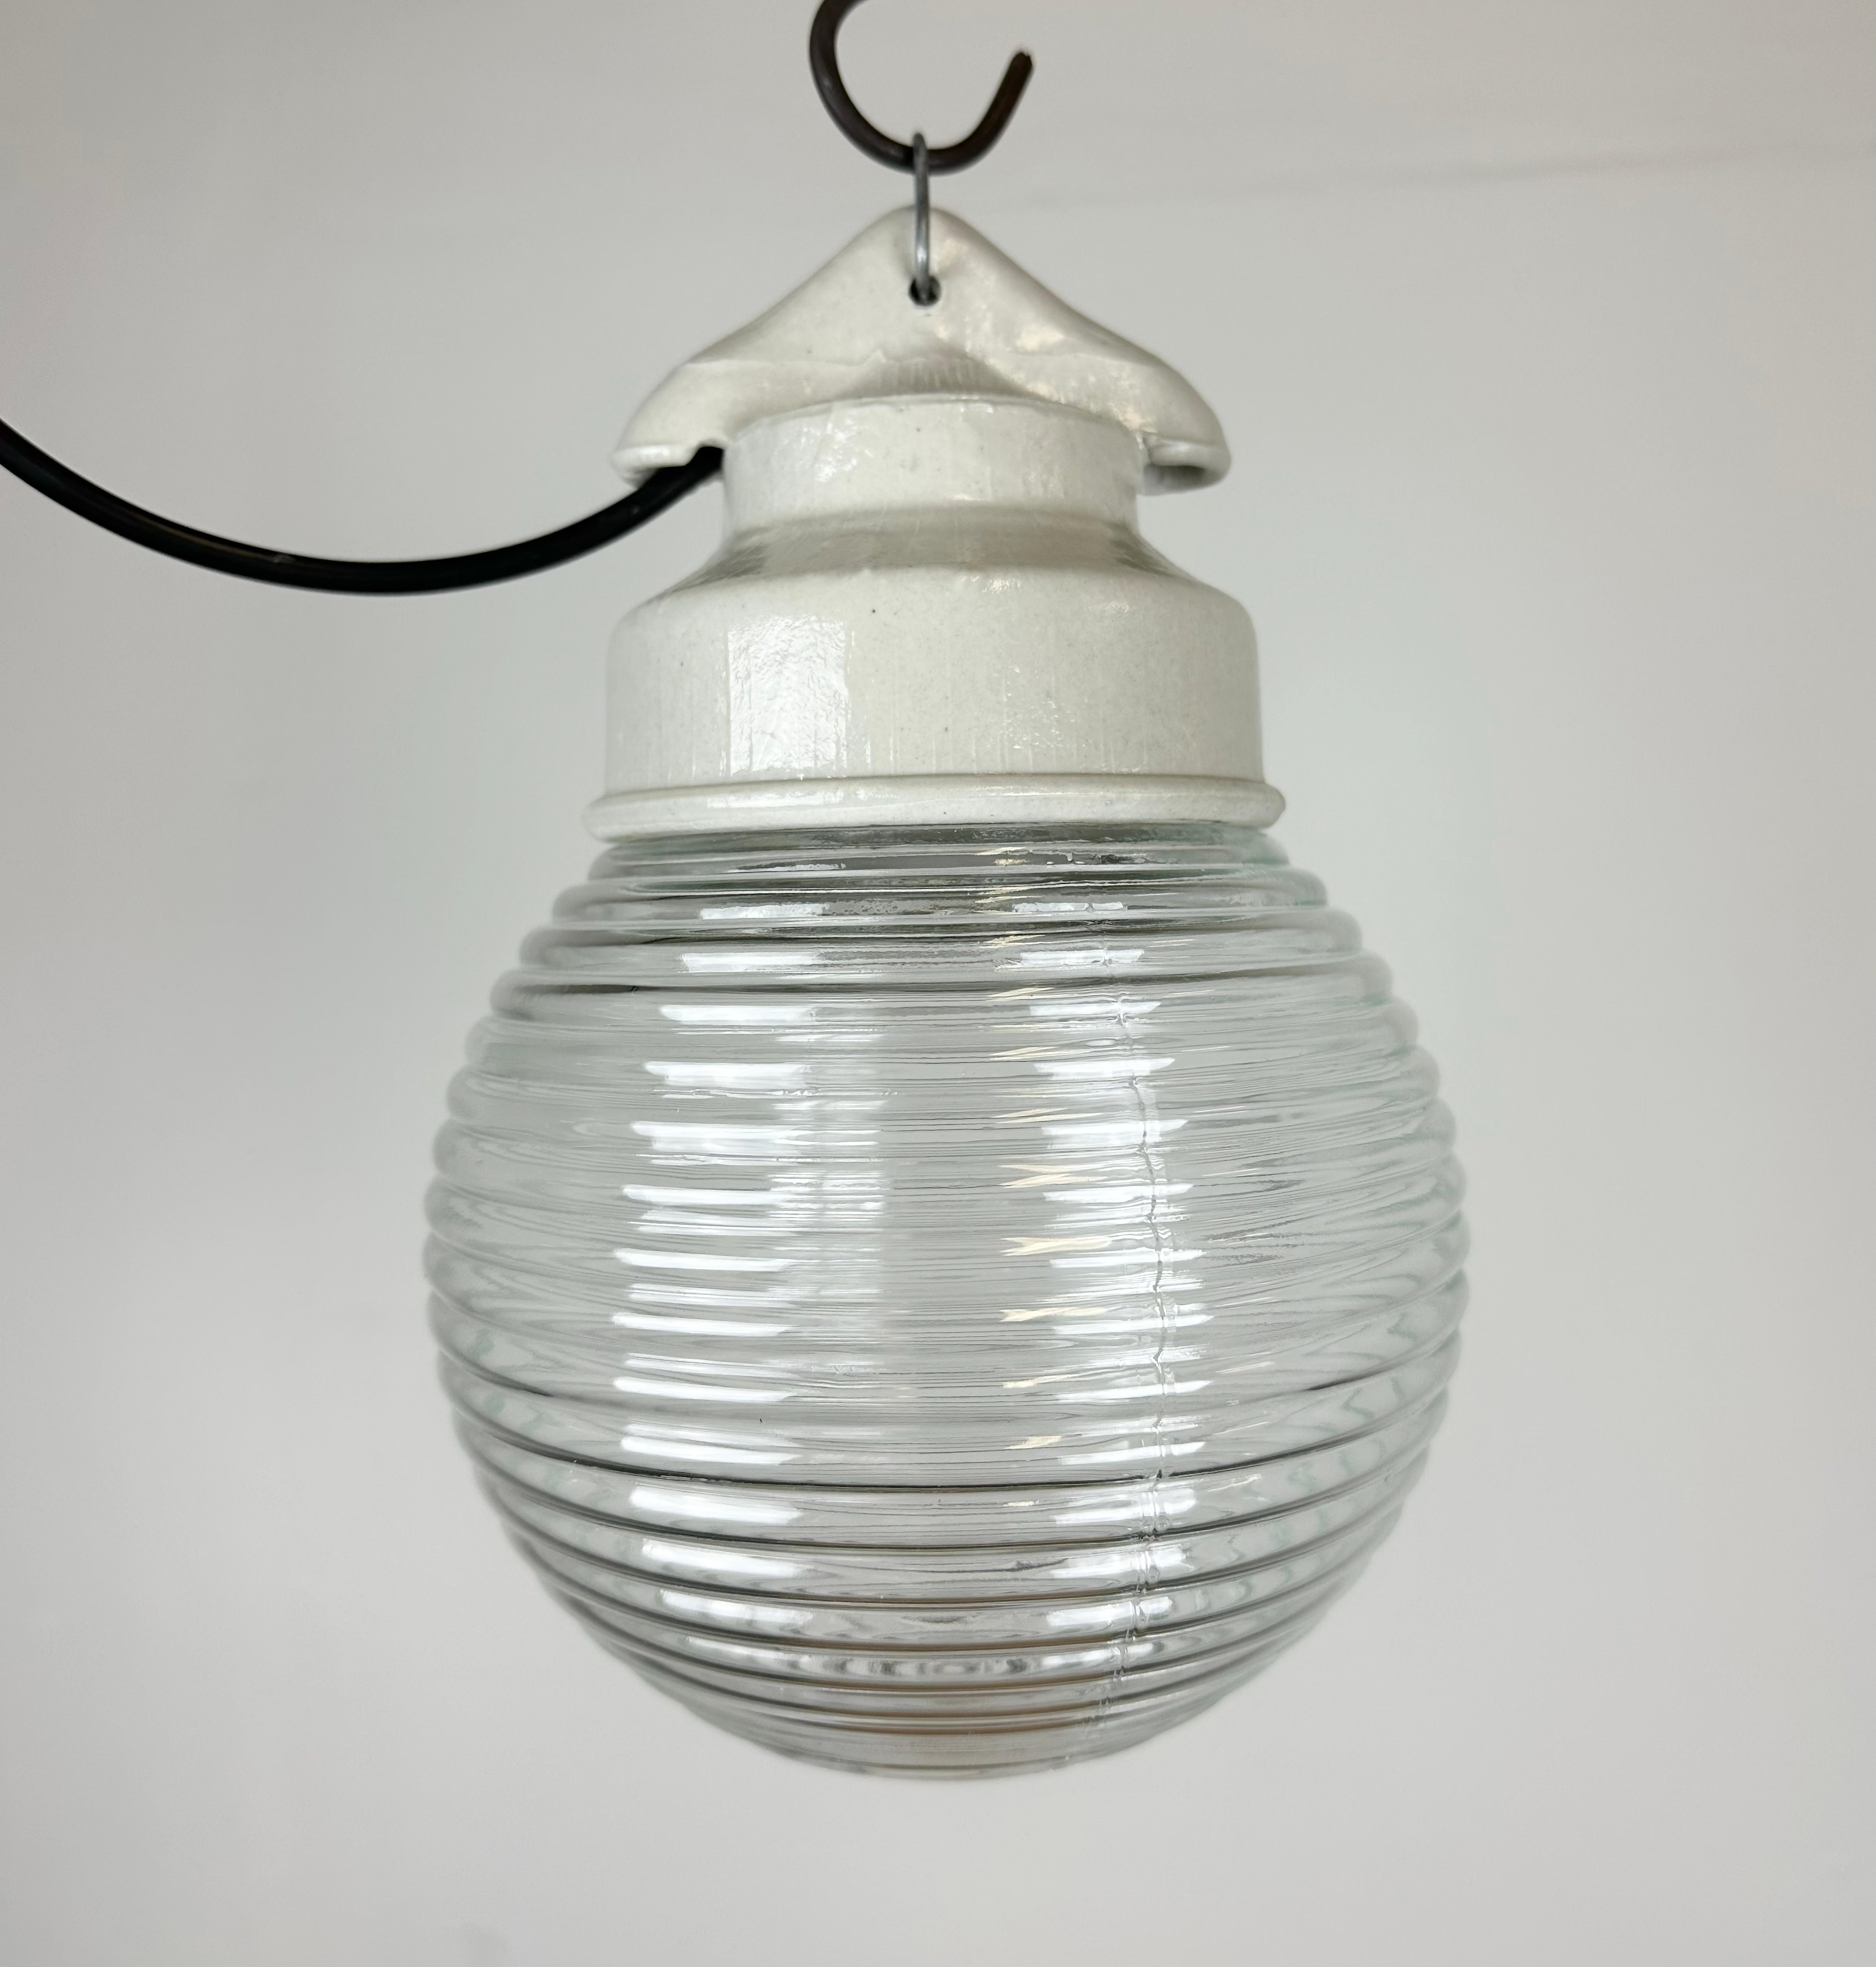 Russian Industrial White Porcelain Pendant Light with Ribbed Glass, 1970s For Sale